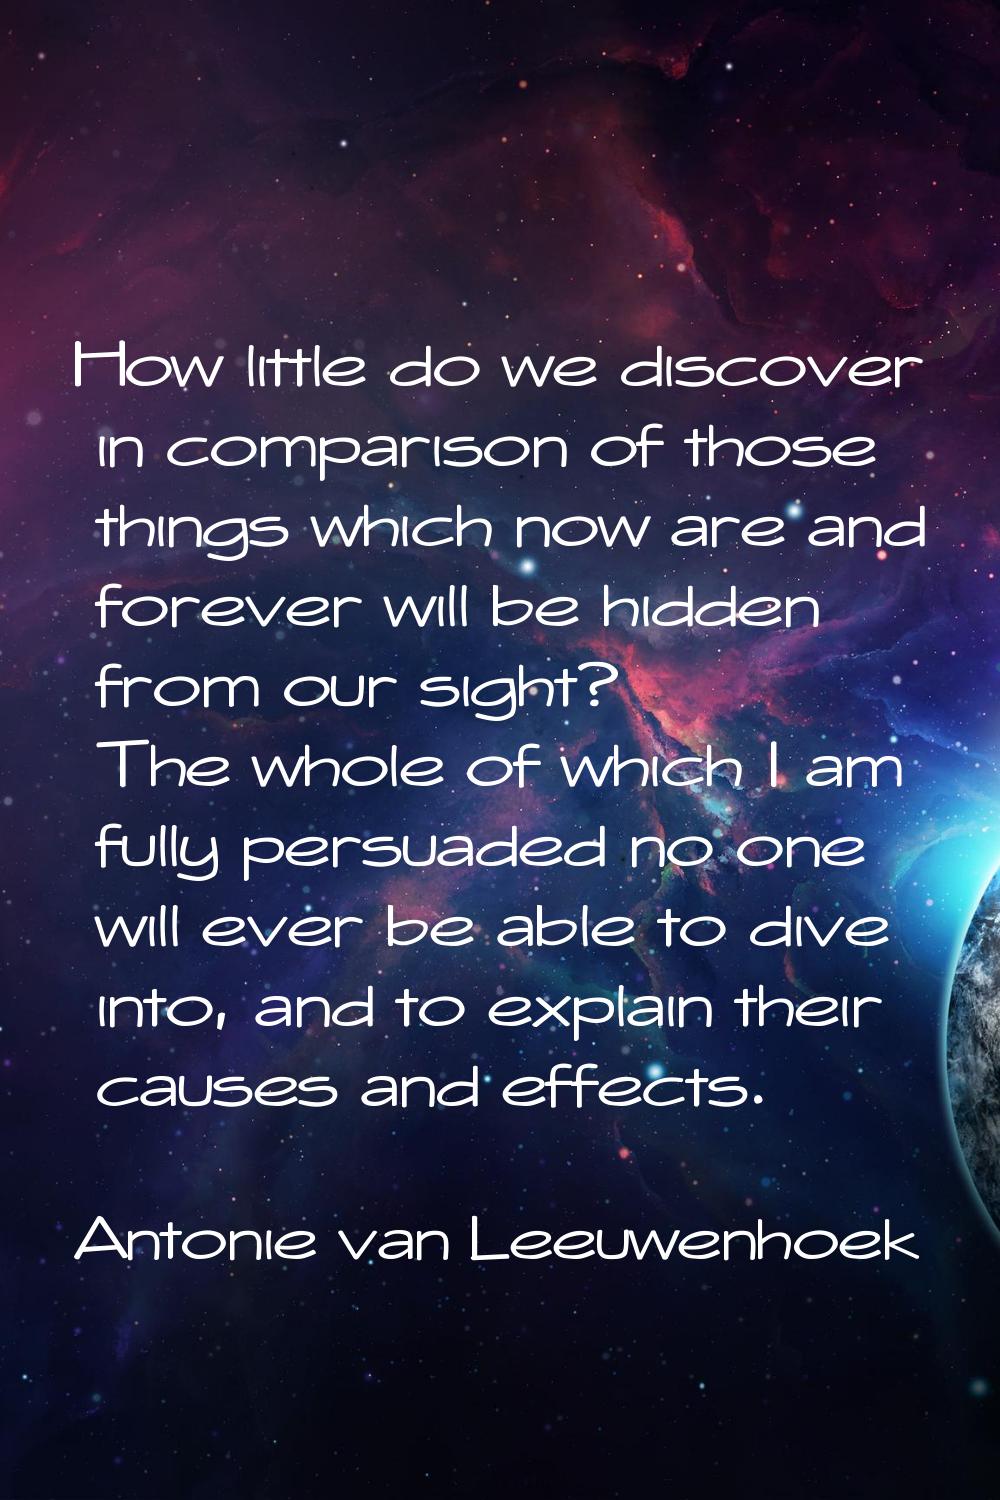 How little do we discover in comparison of those things which now are and forever will be hidden fr